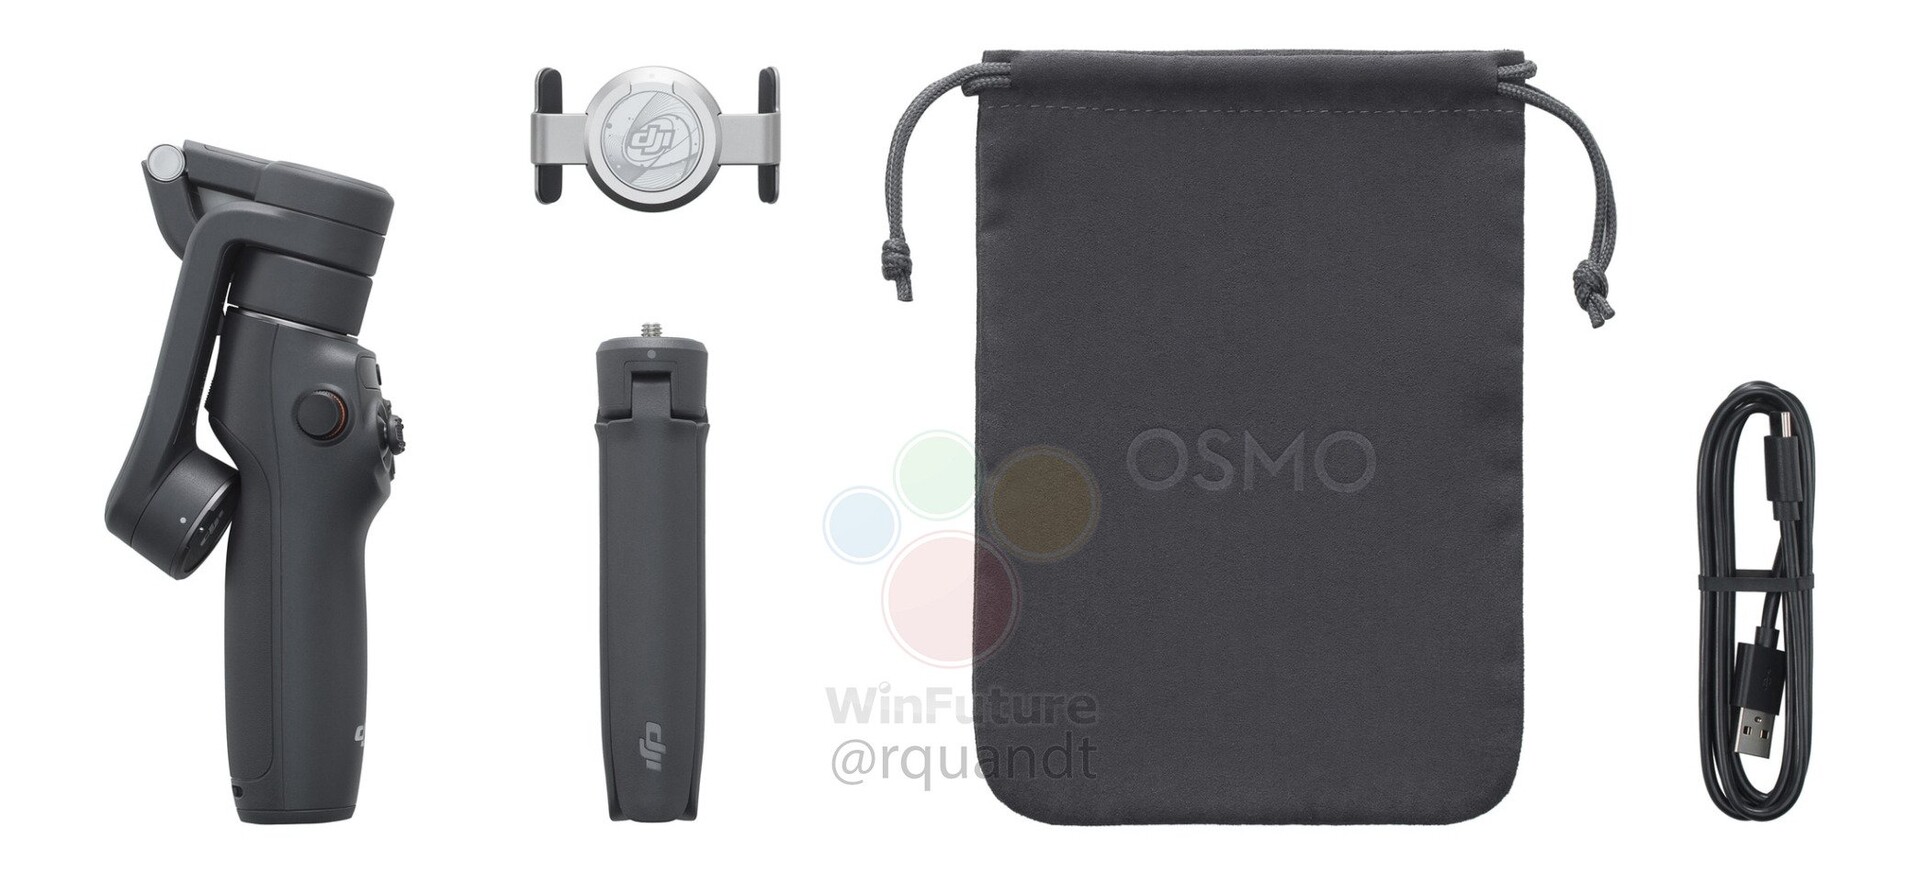 DJI releases new firmware for Osmo Mobile 6, OM SE gimbals